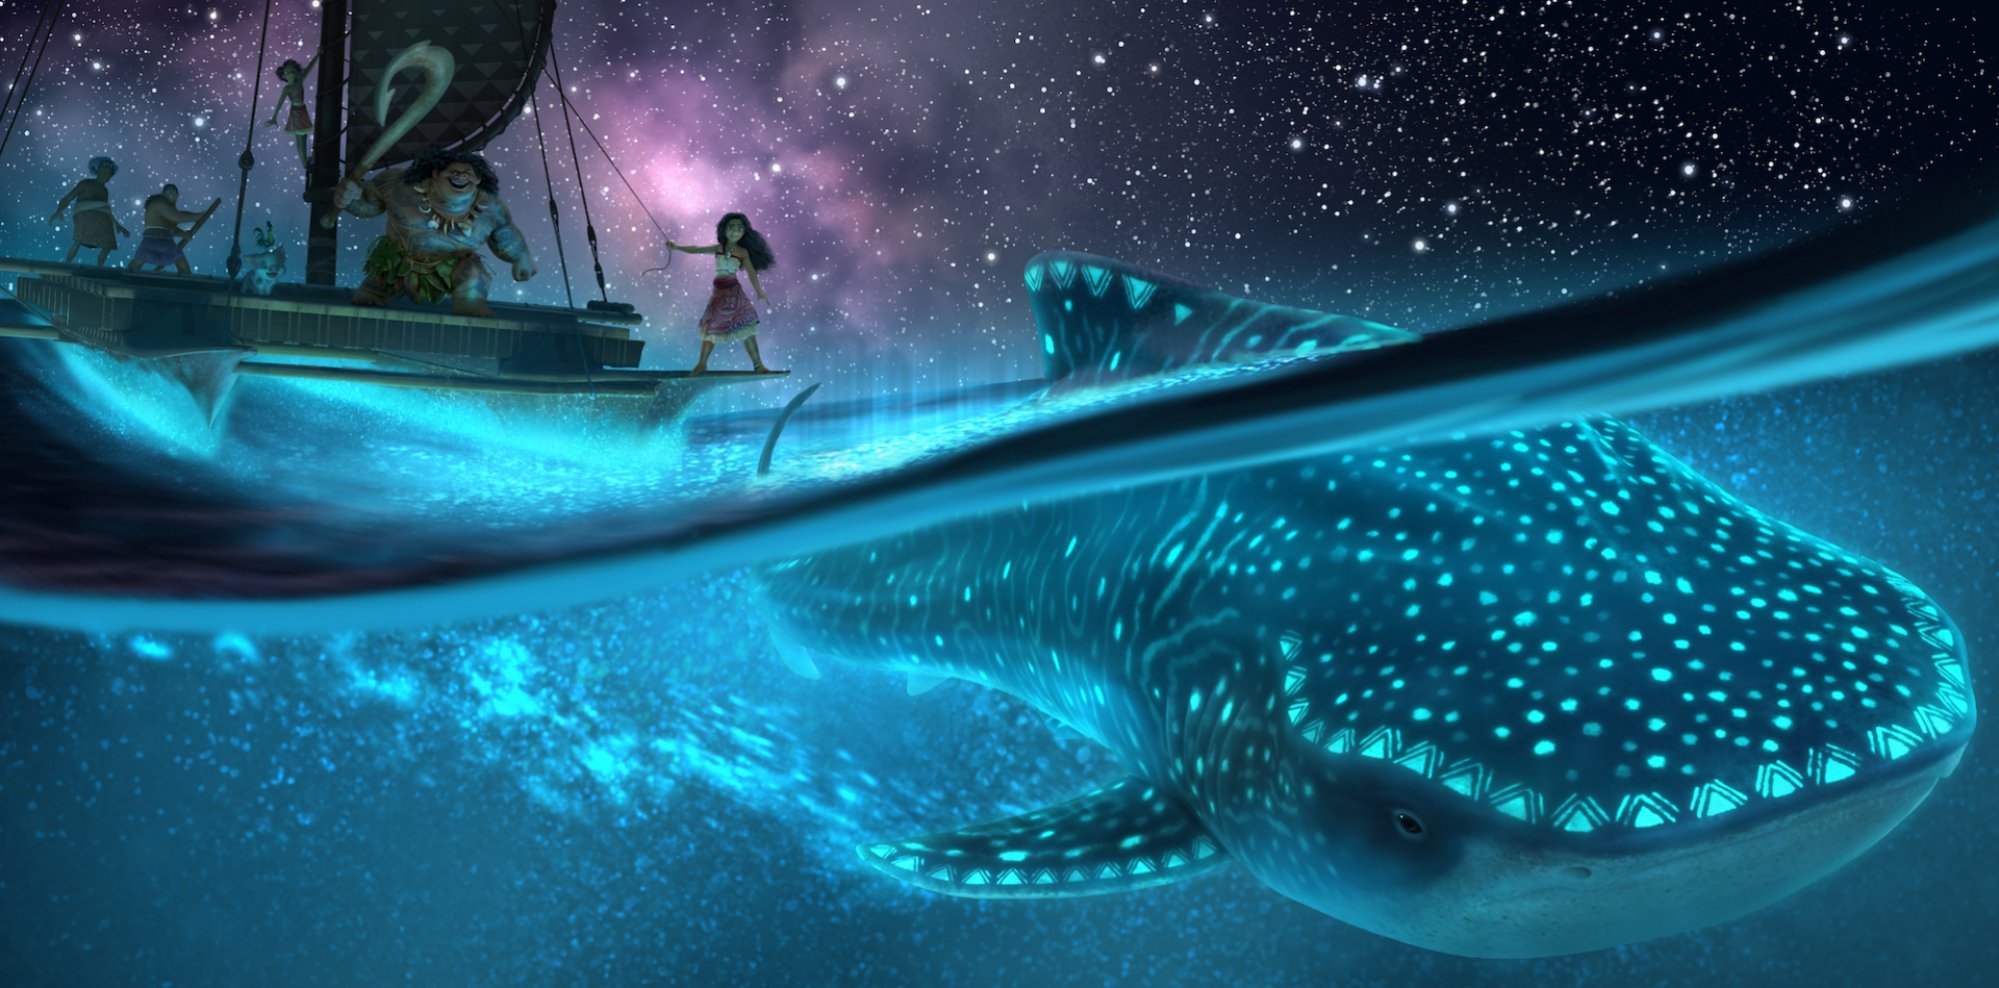 A still from "Moana 2" showing a group on a small boat on the ocean sailing above a whale.